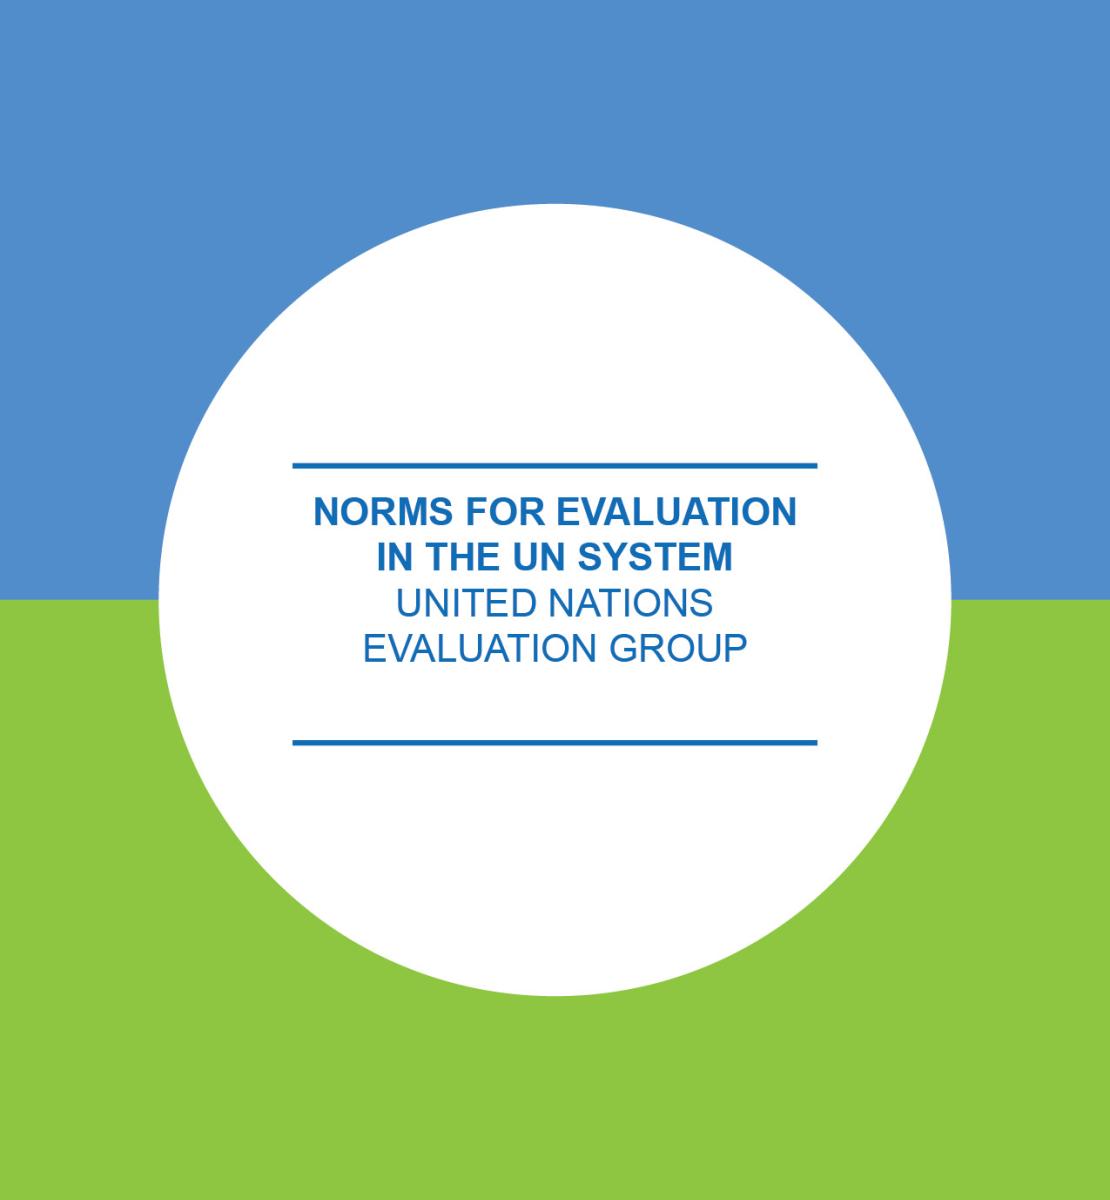 Norms for Evaluation in the UN System